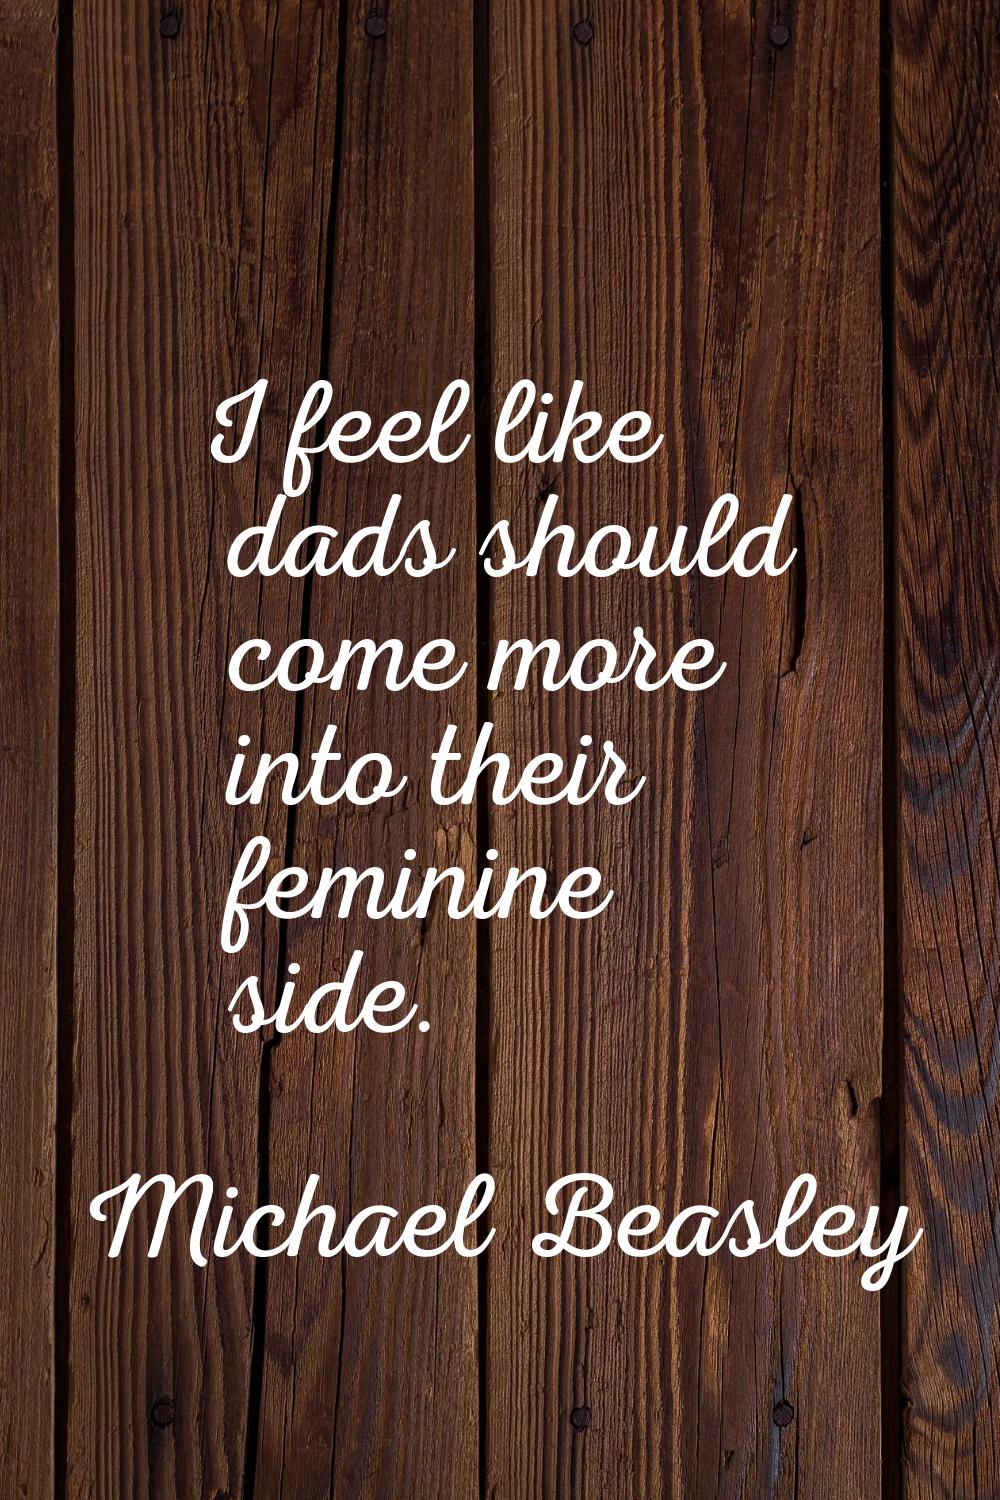 I feel like dads should come more into their feminine side.